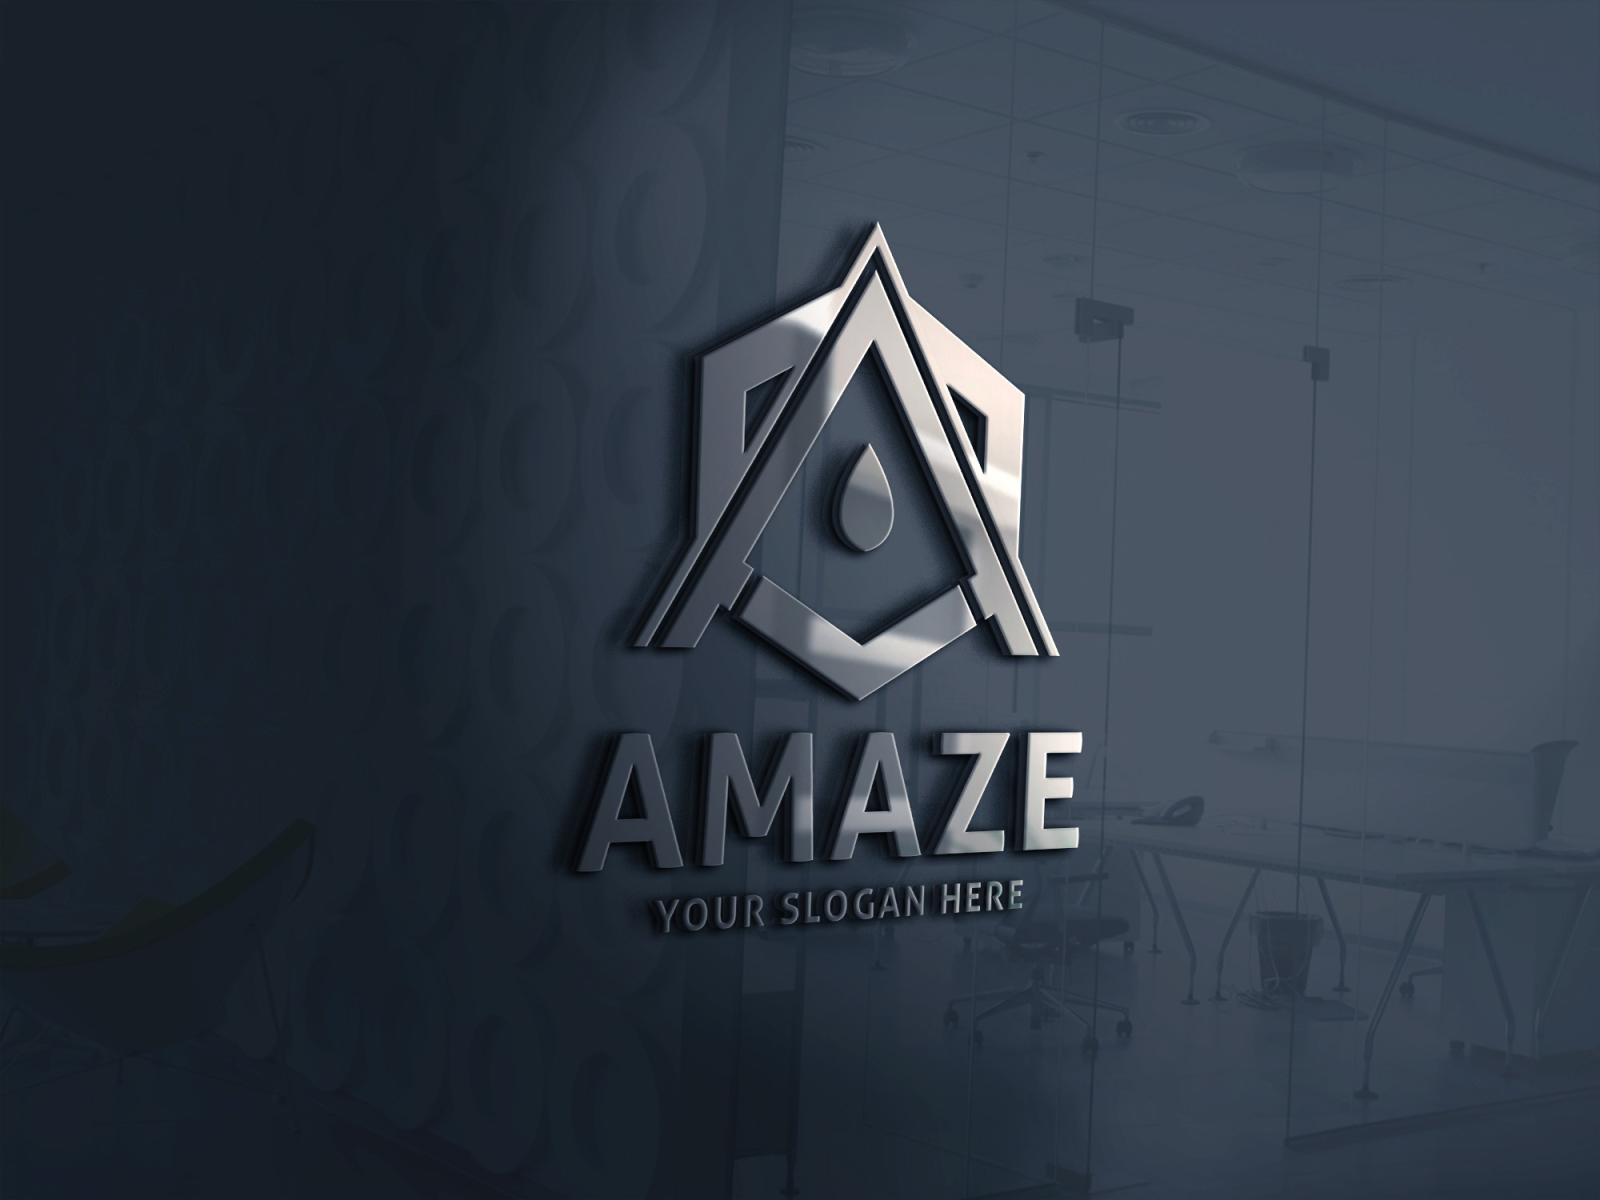 Amaze A Logo by Aroy Project on Dribbble